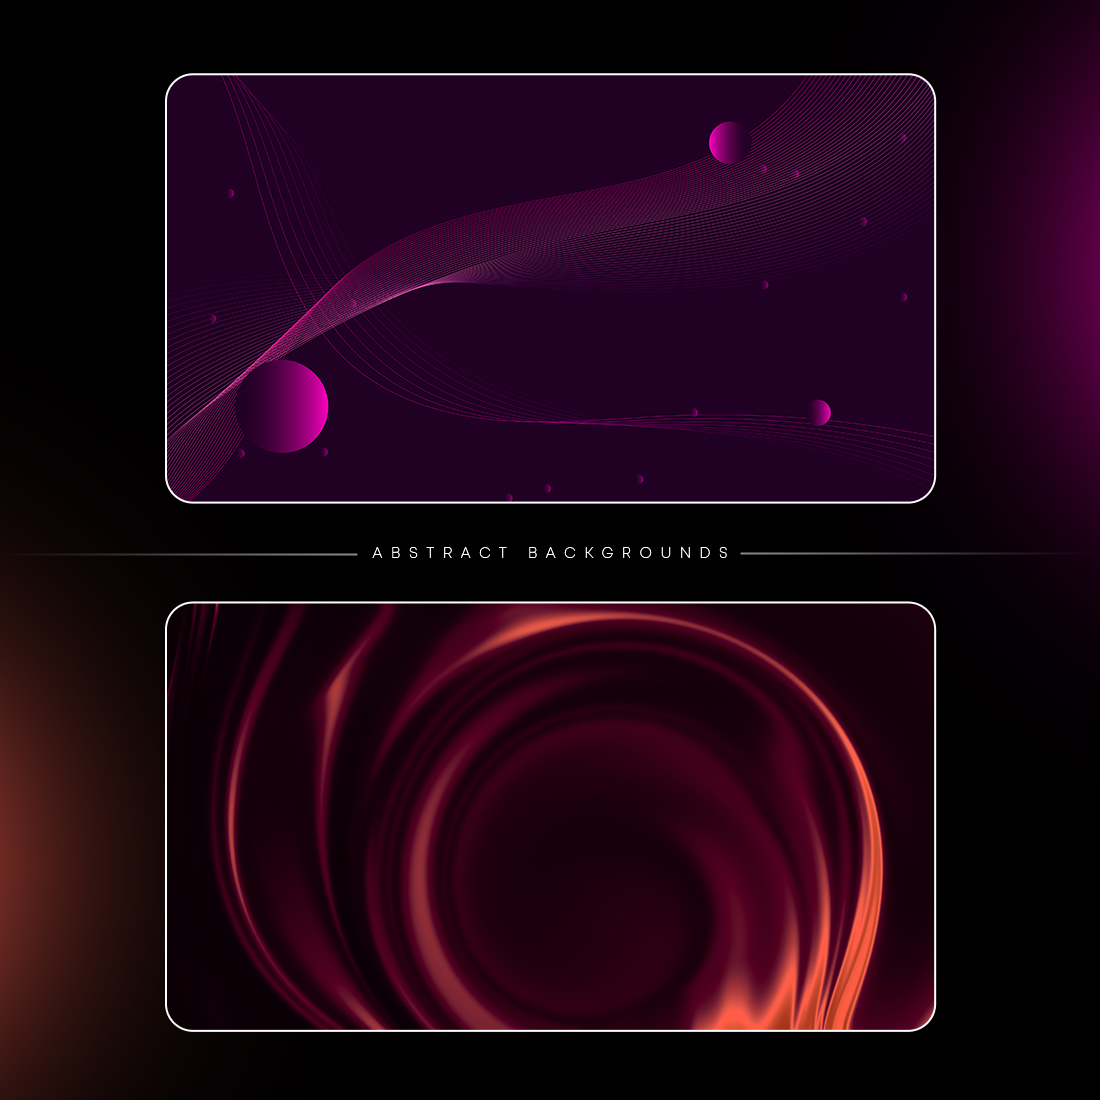 4 Abstract backrounds (4K) High resolution preview image.